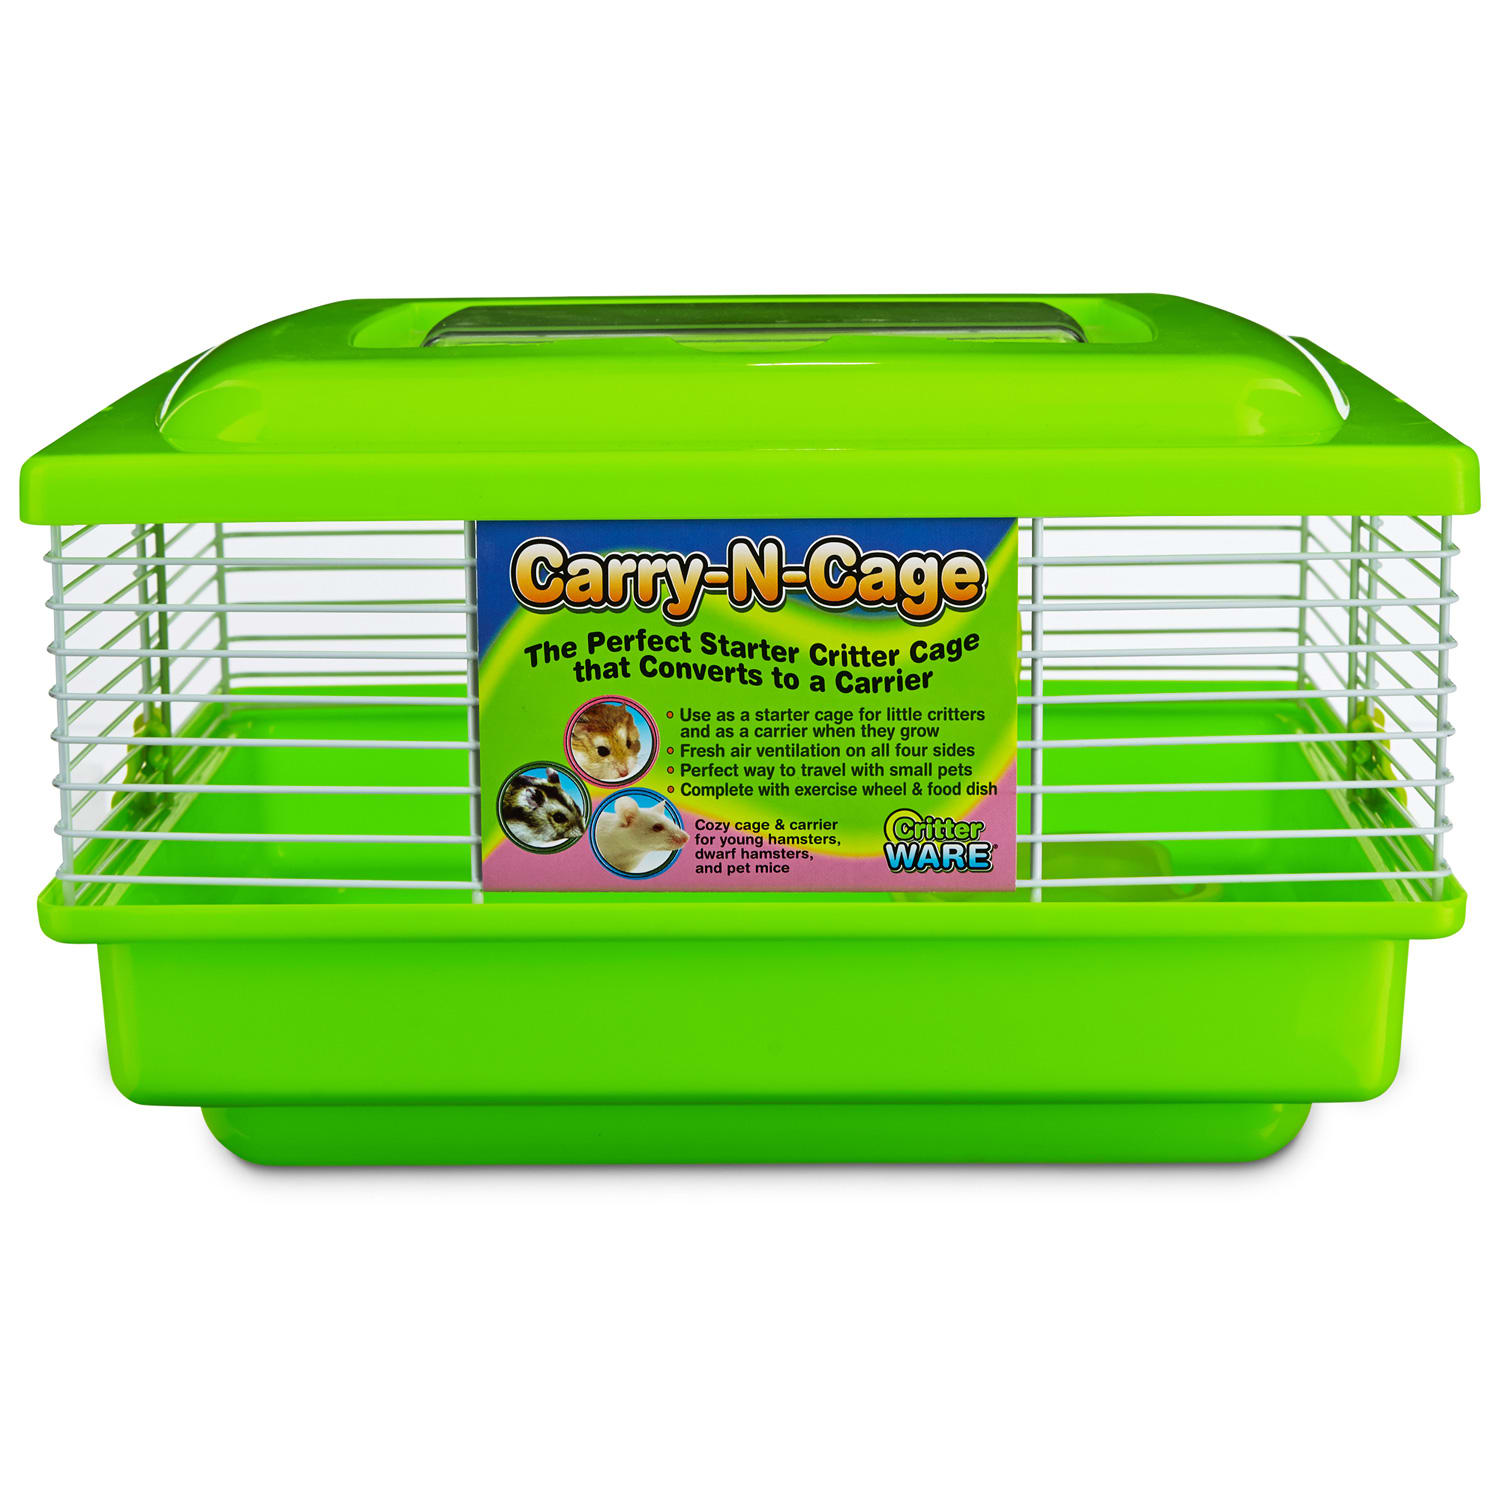 petco hamster cages